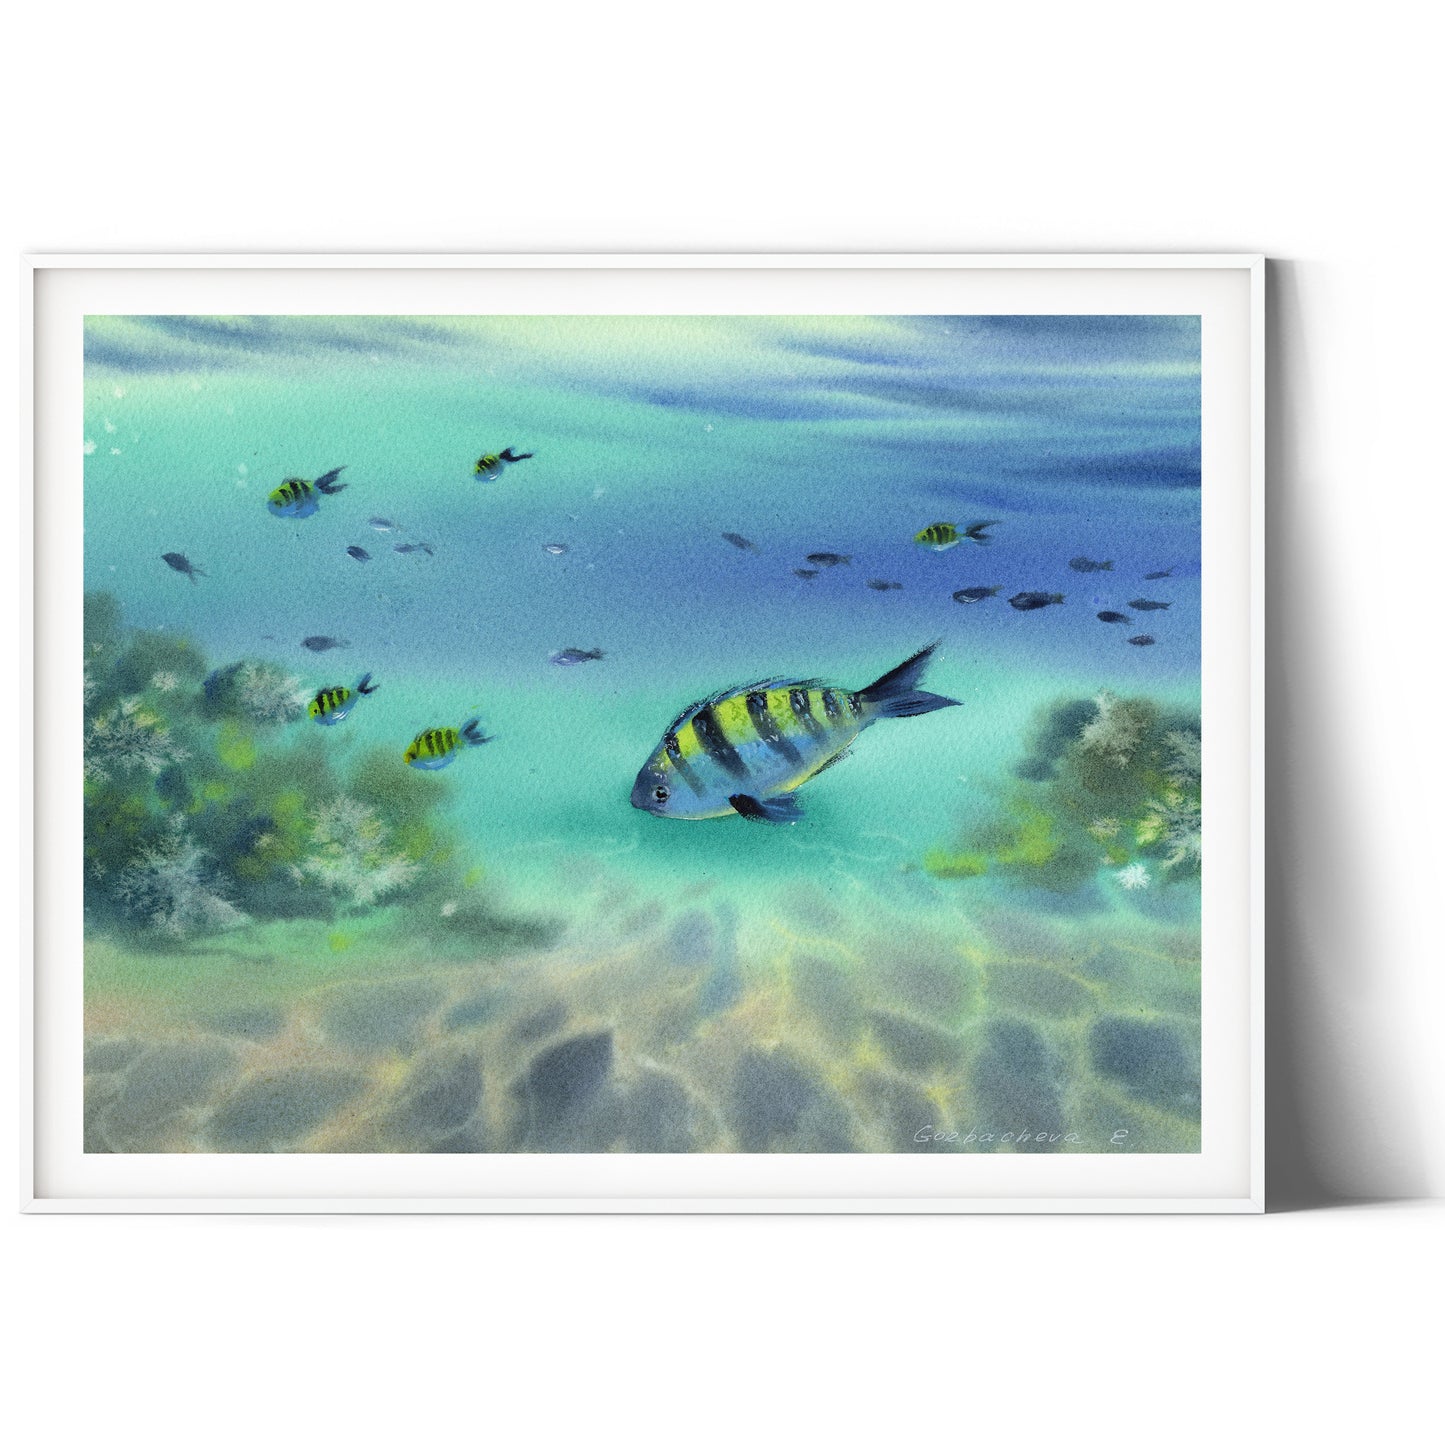 Red Sea Coral Reef Underwater Wall Art, Print Decor for Home & Office Design, Scuba Diving I Archival Paper or CANVAS